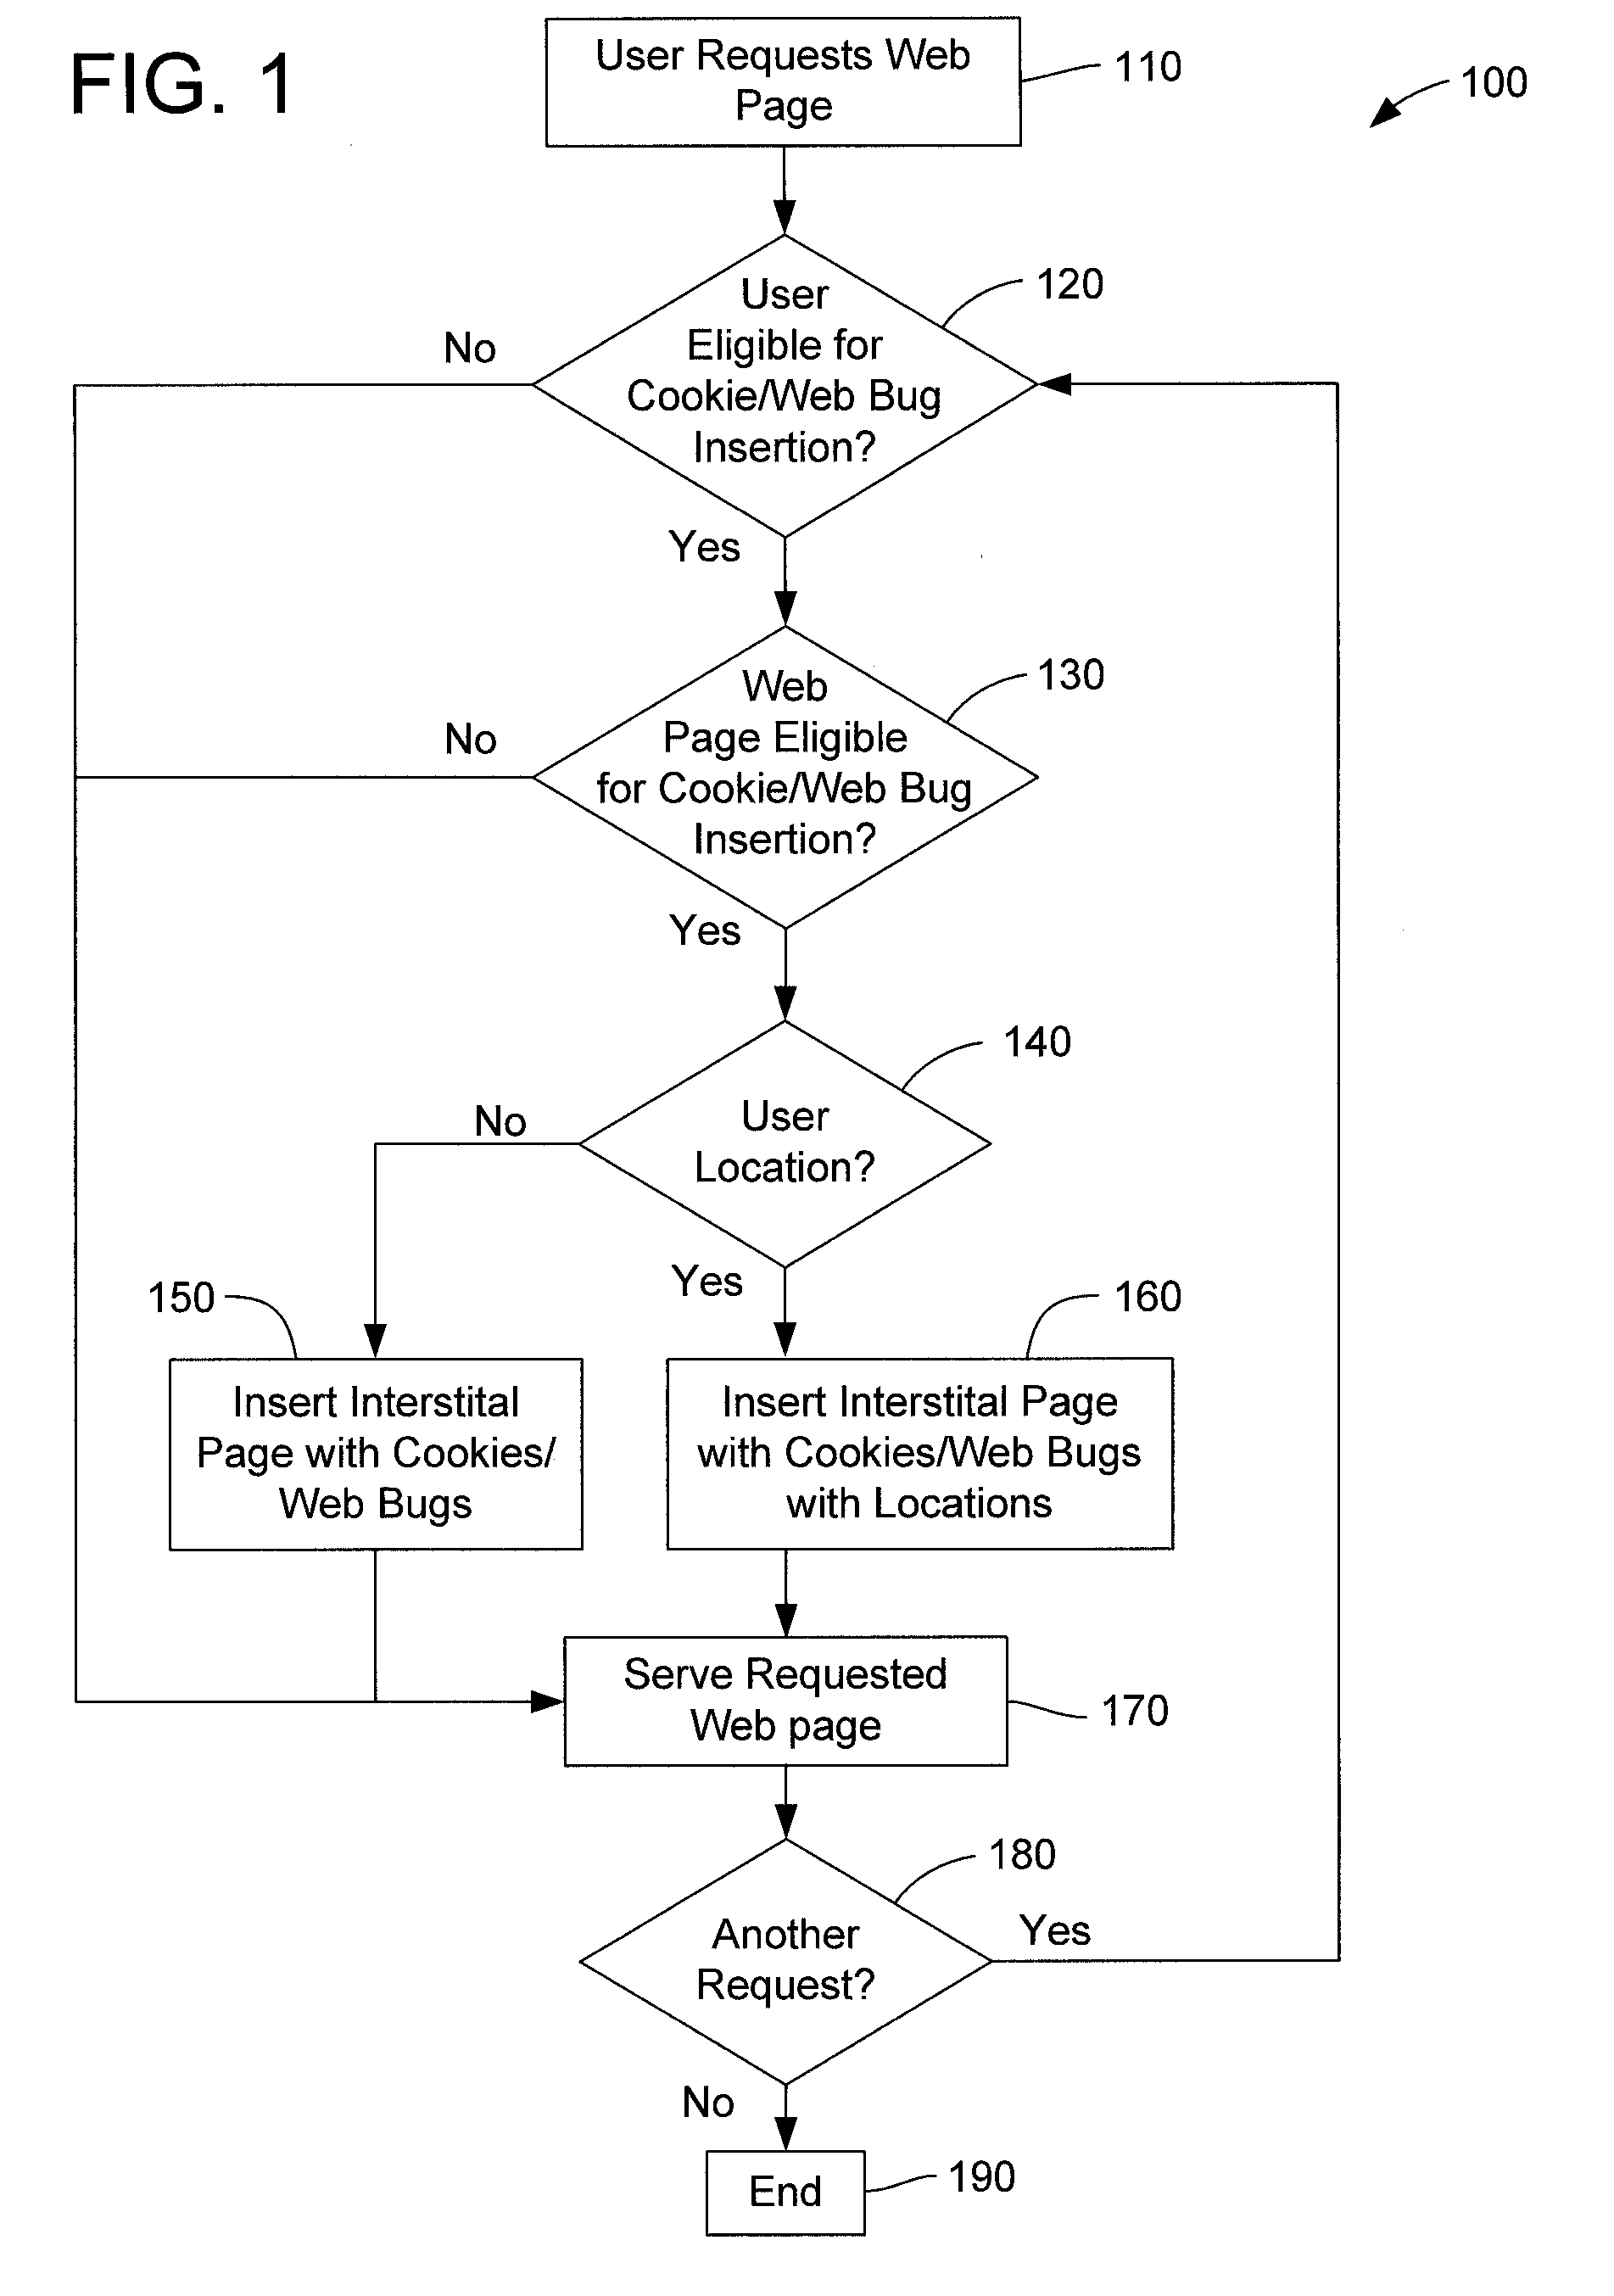 Method and apparatus for internet traffic monitoring by third parties using monitoring implements